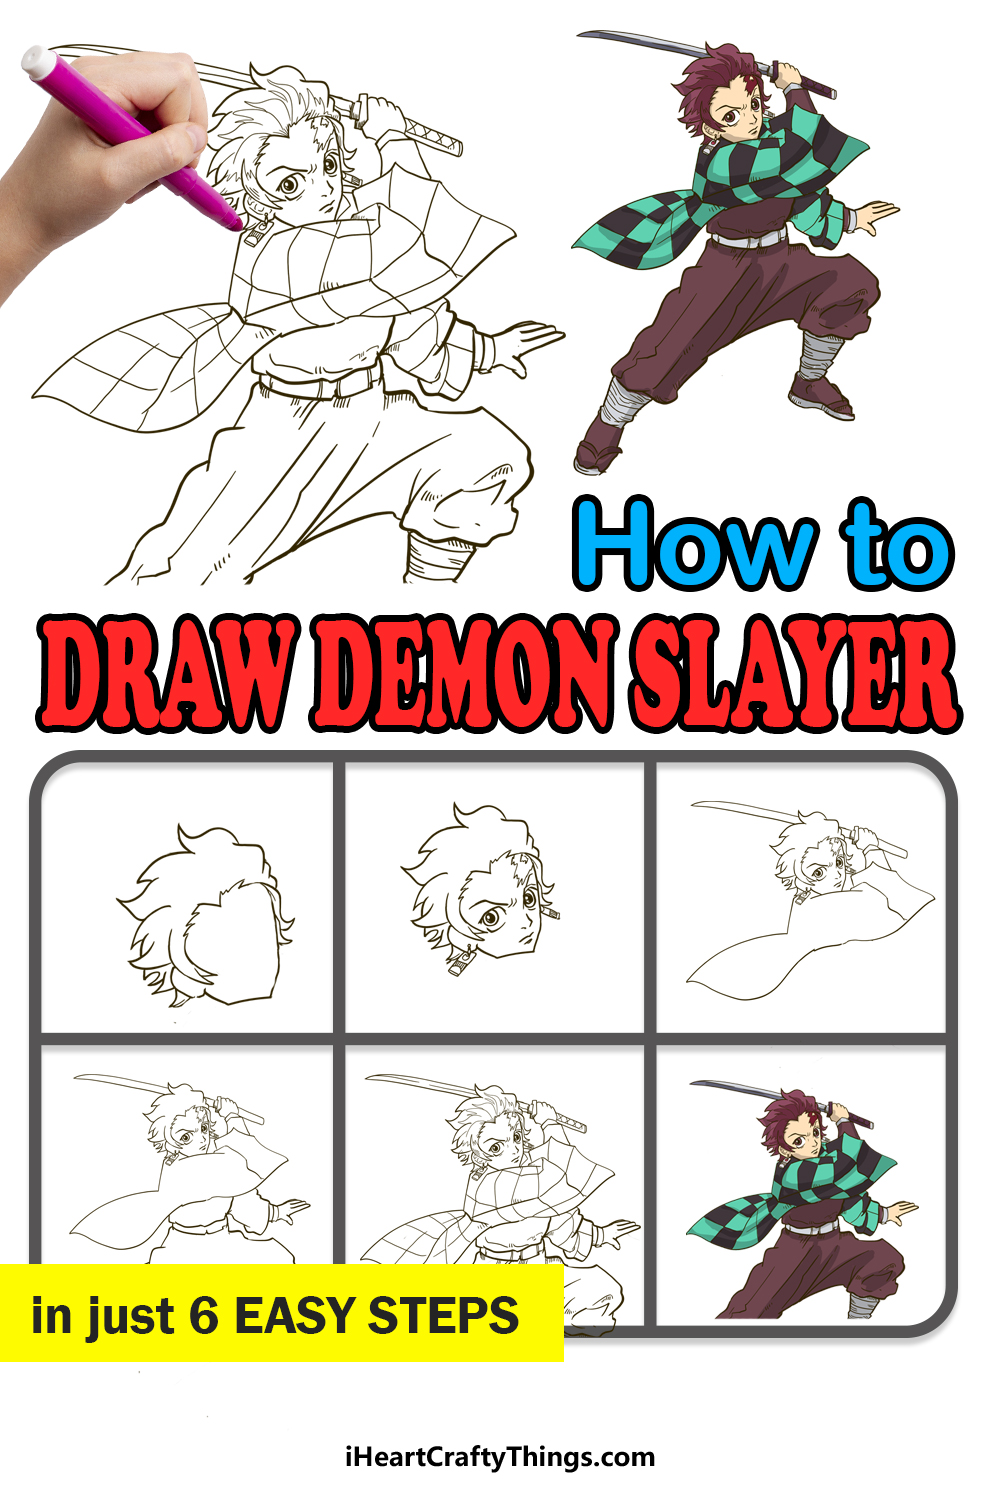 How to Draw Demon Slayer step by step guide